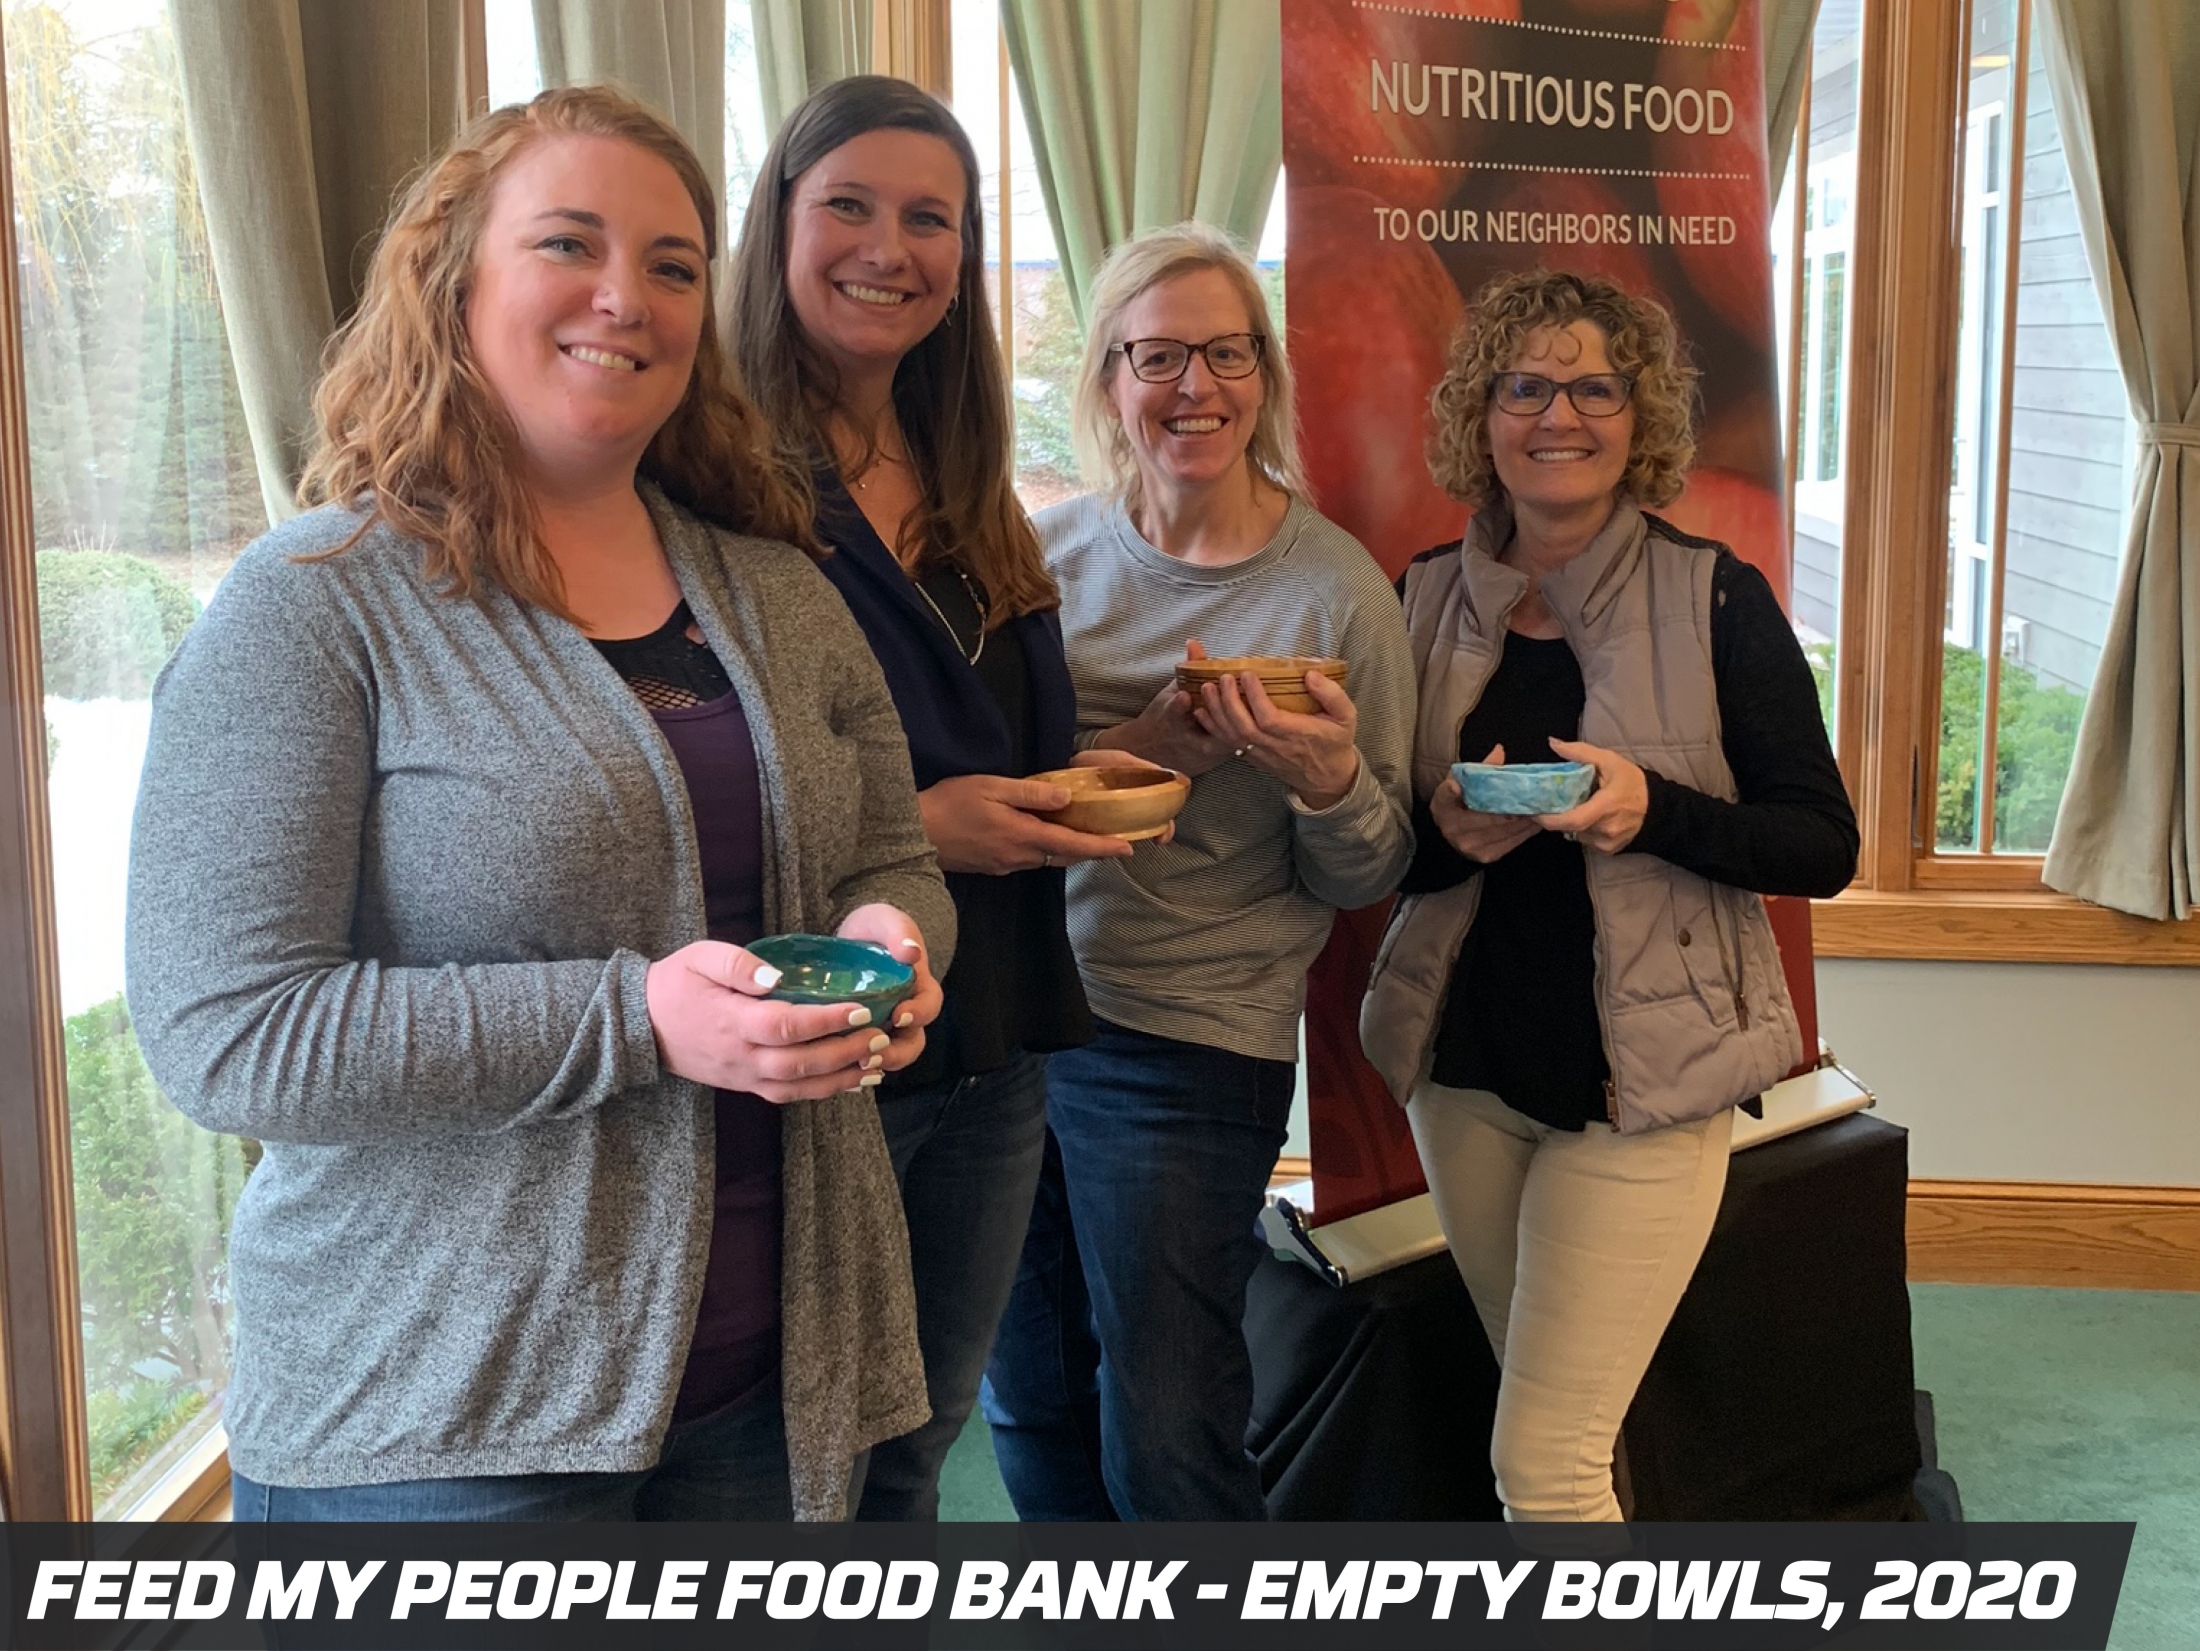 Precision Pipeline Community Involvement: Feed My People Food Bank - Empty Bowls 2020 